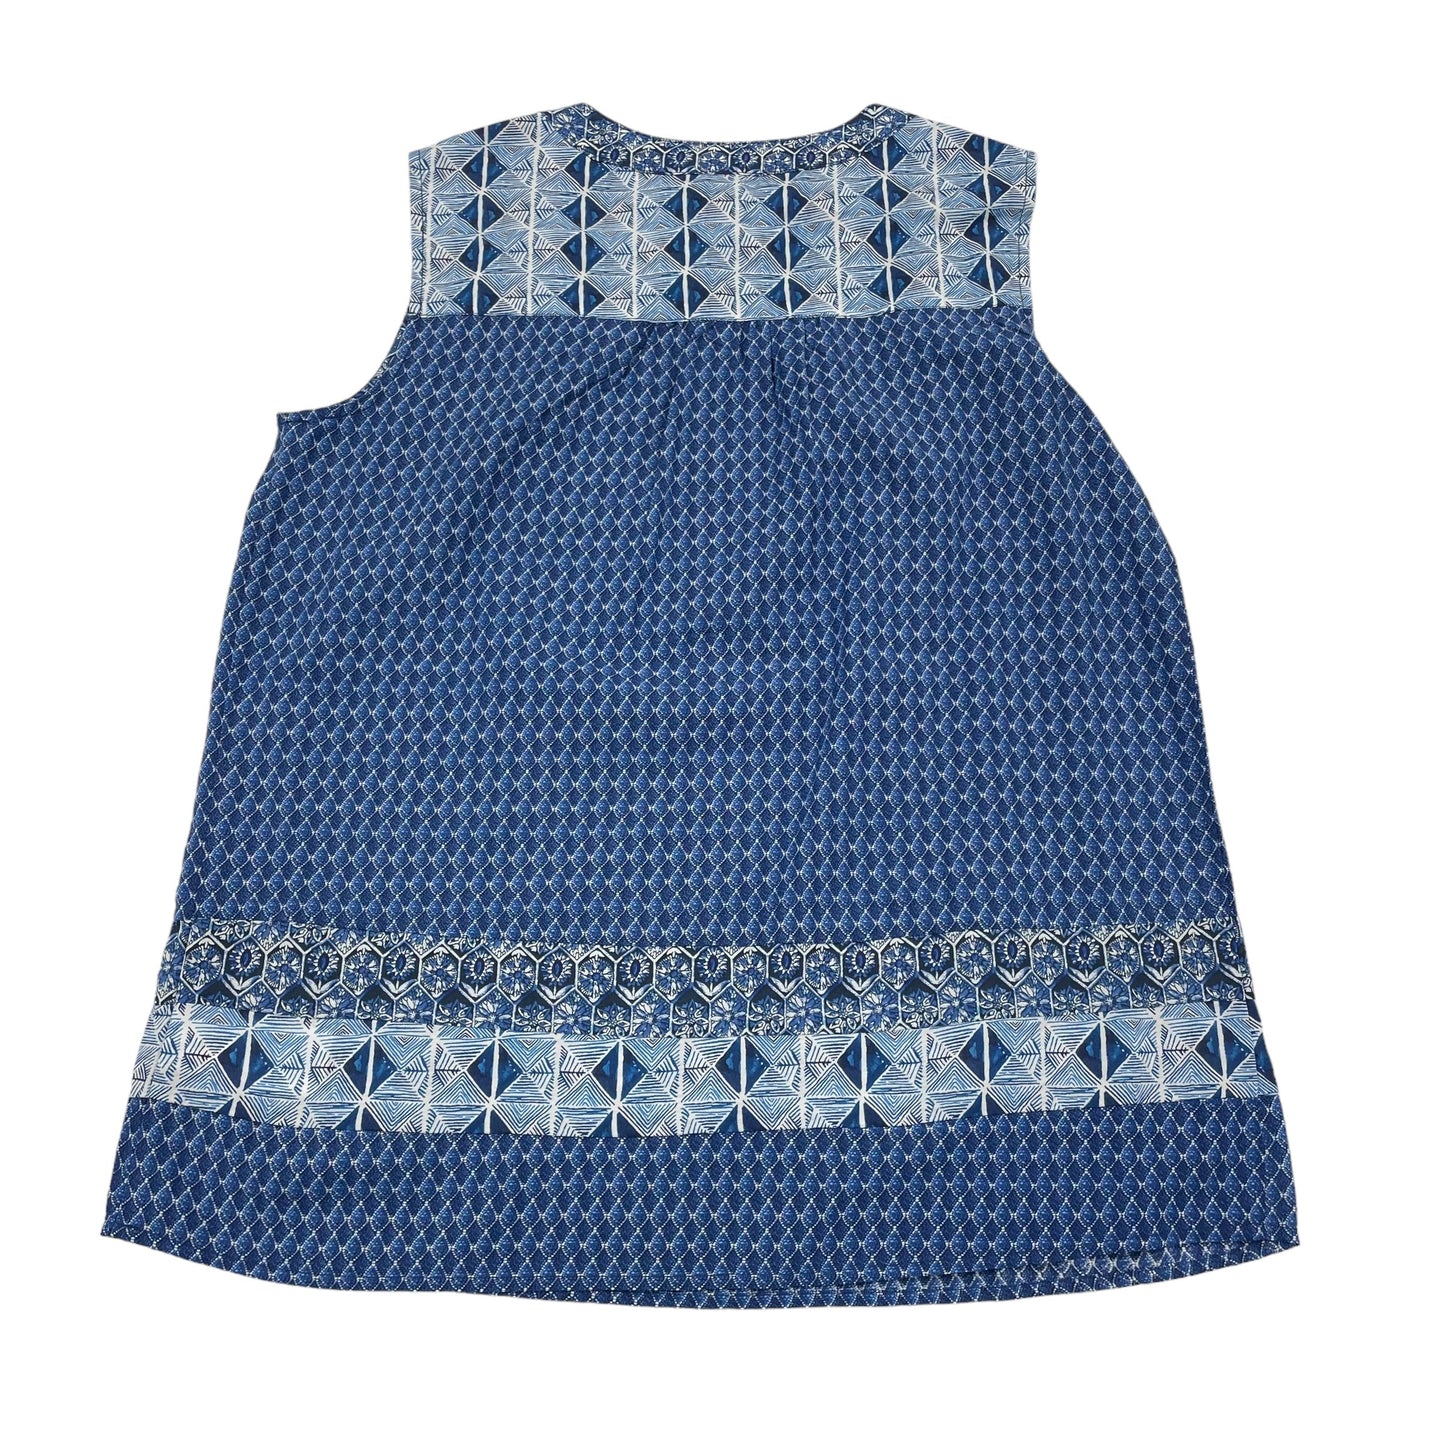 BLUE TOP SLEEVELESS by GAP Size:S